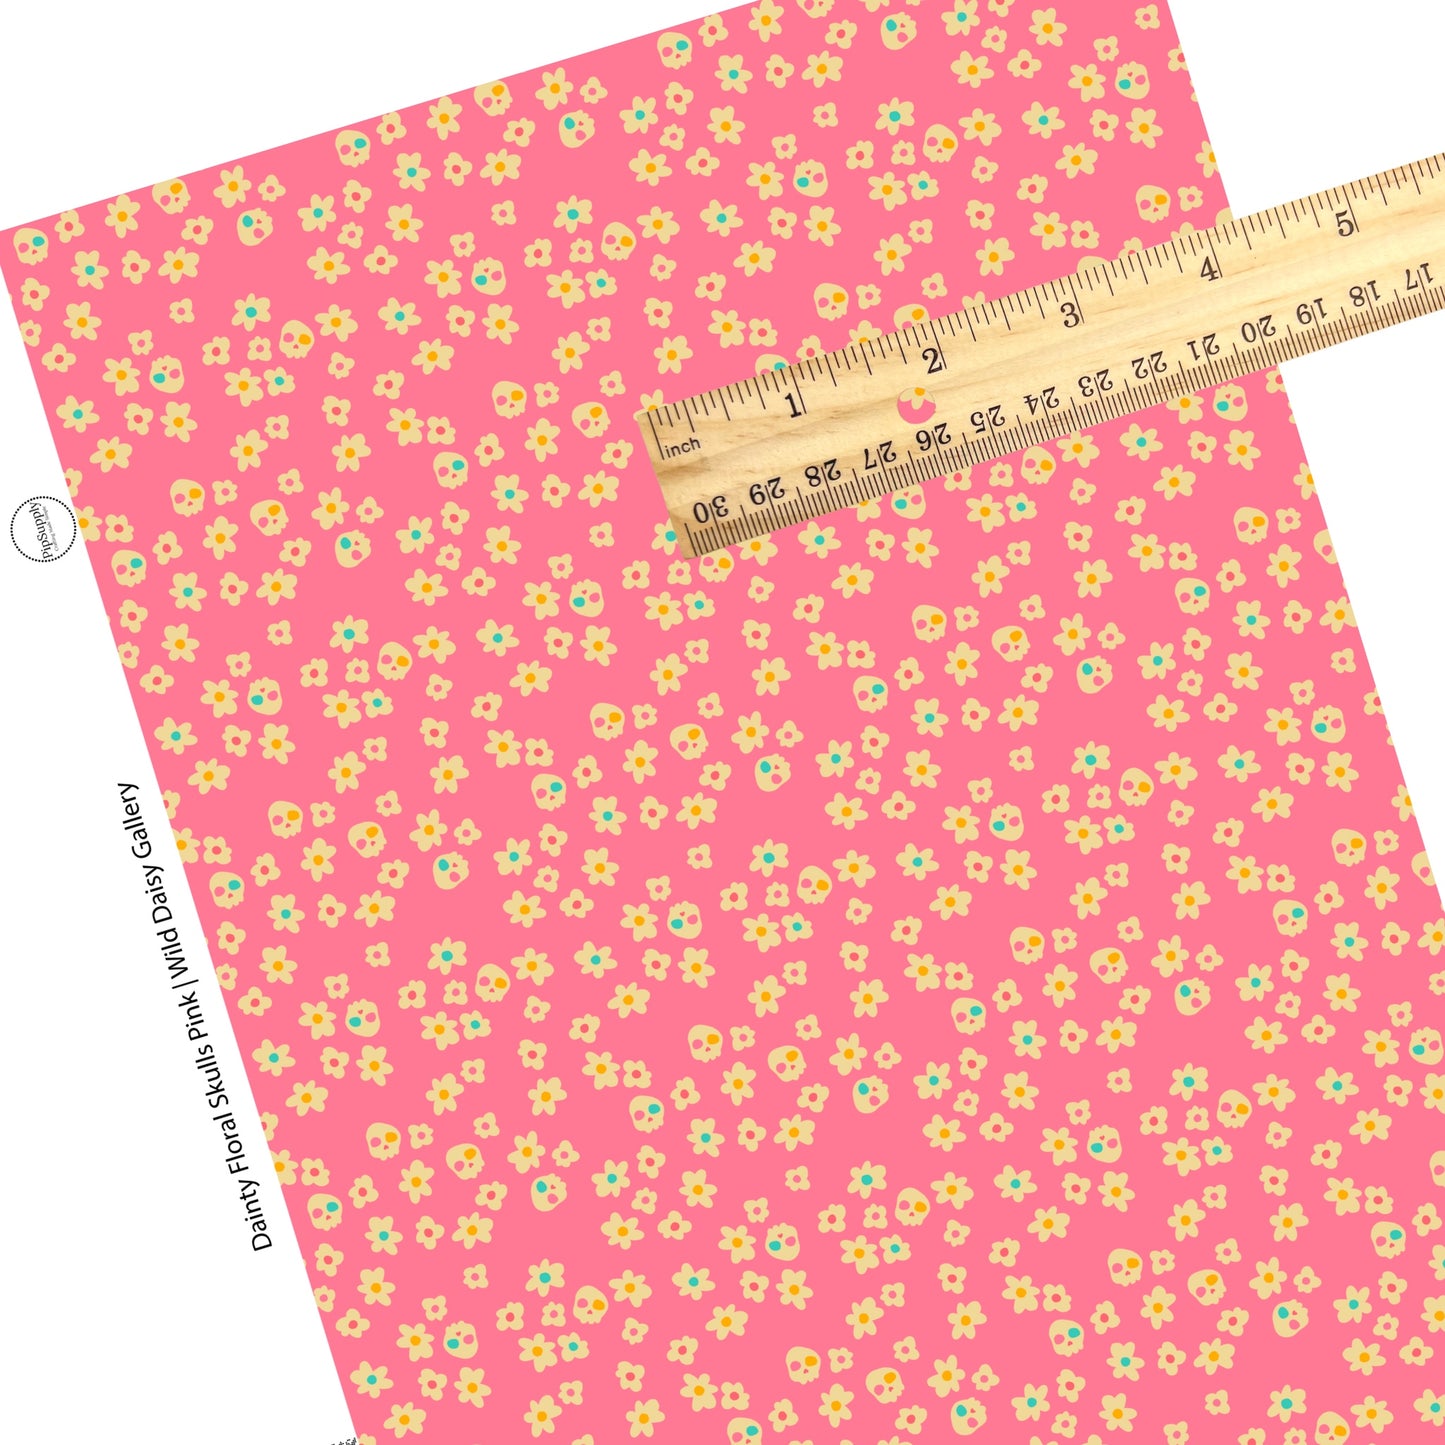 Floral skulls with colorful accents on pink faux leather sheets